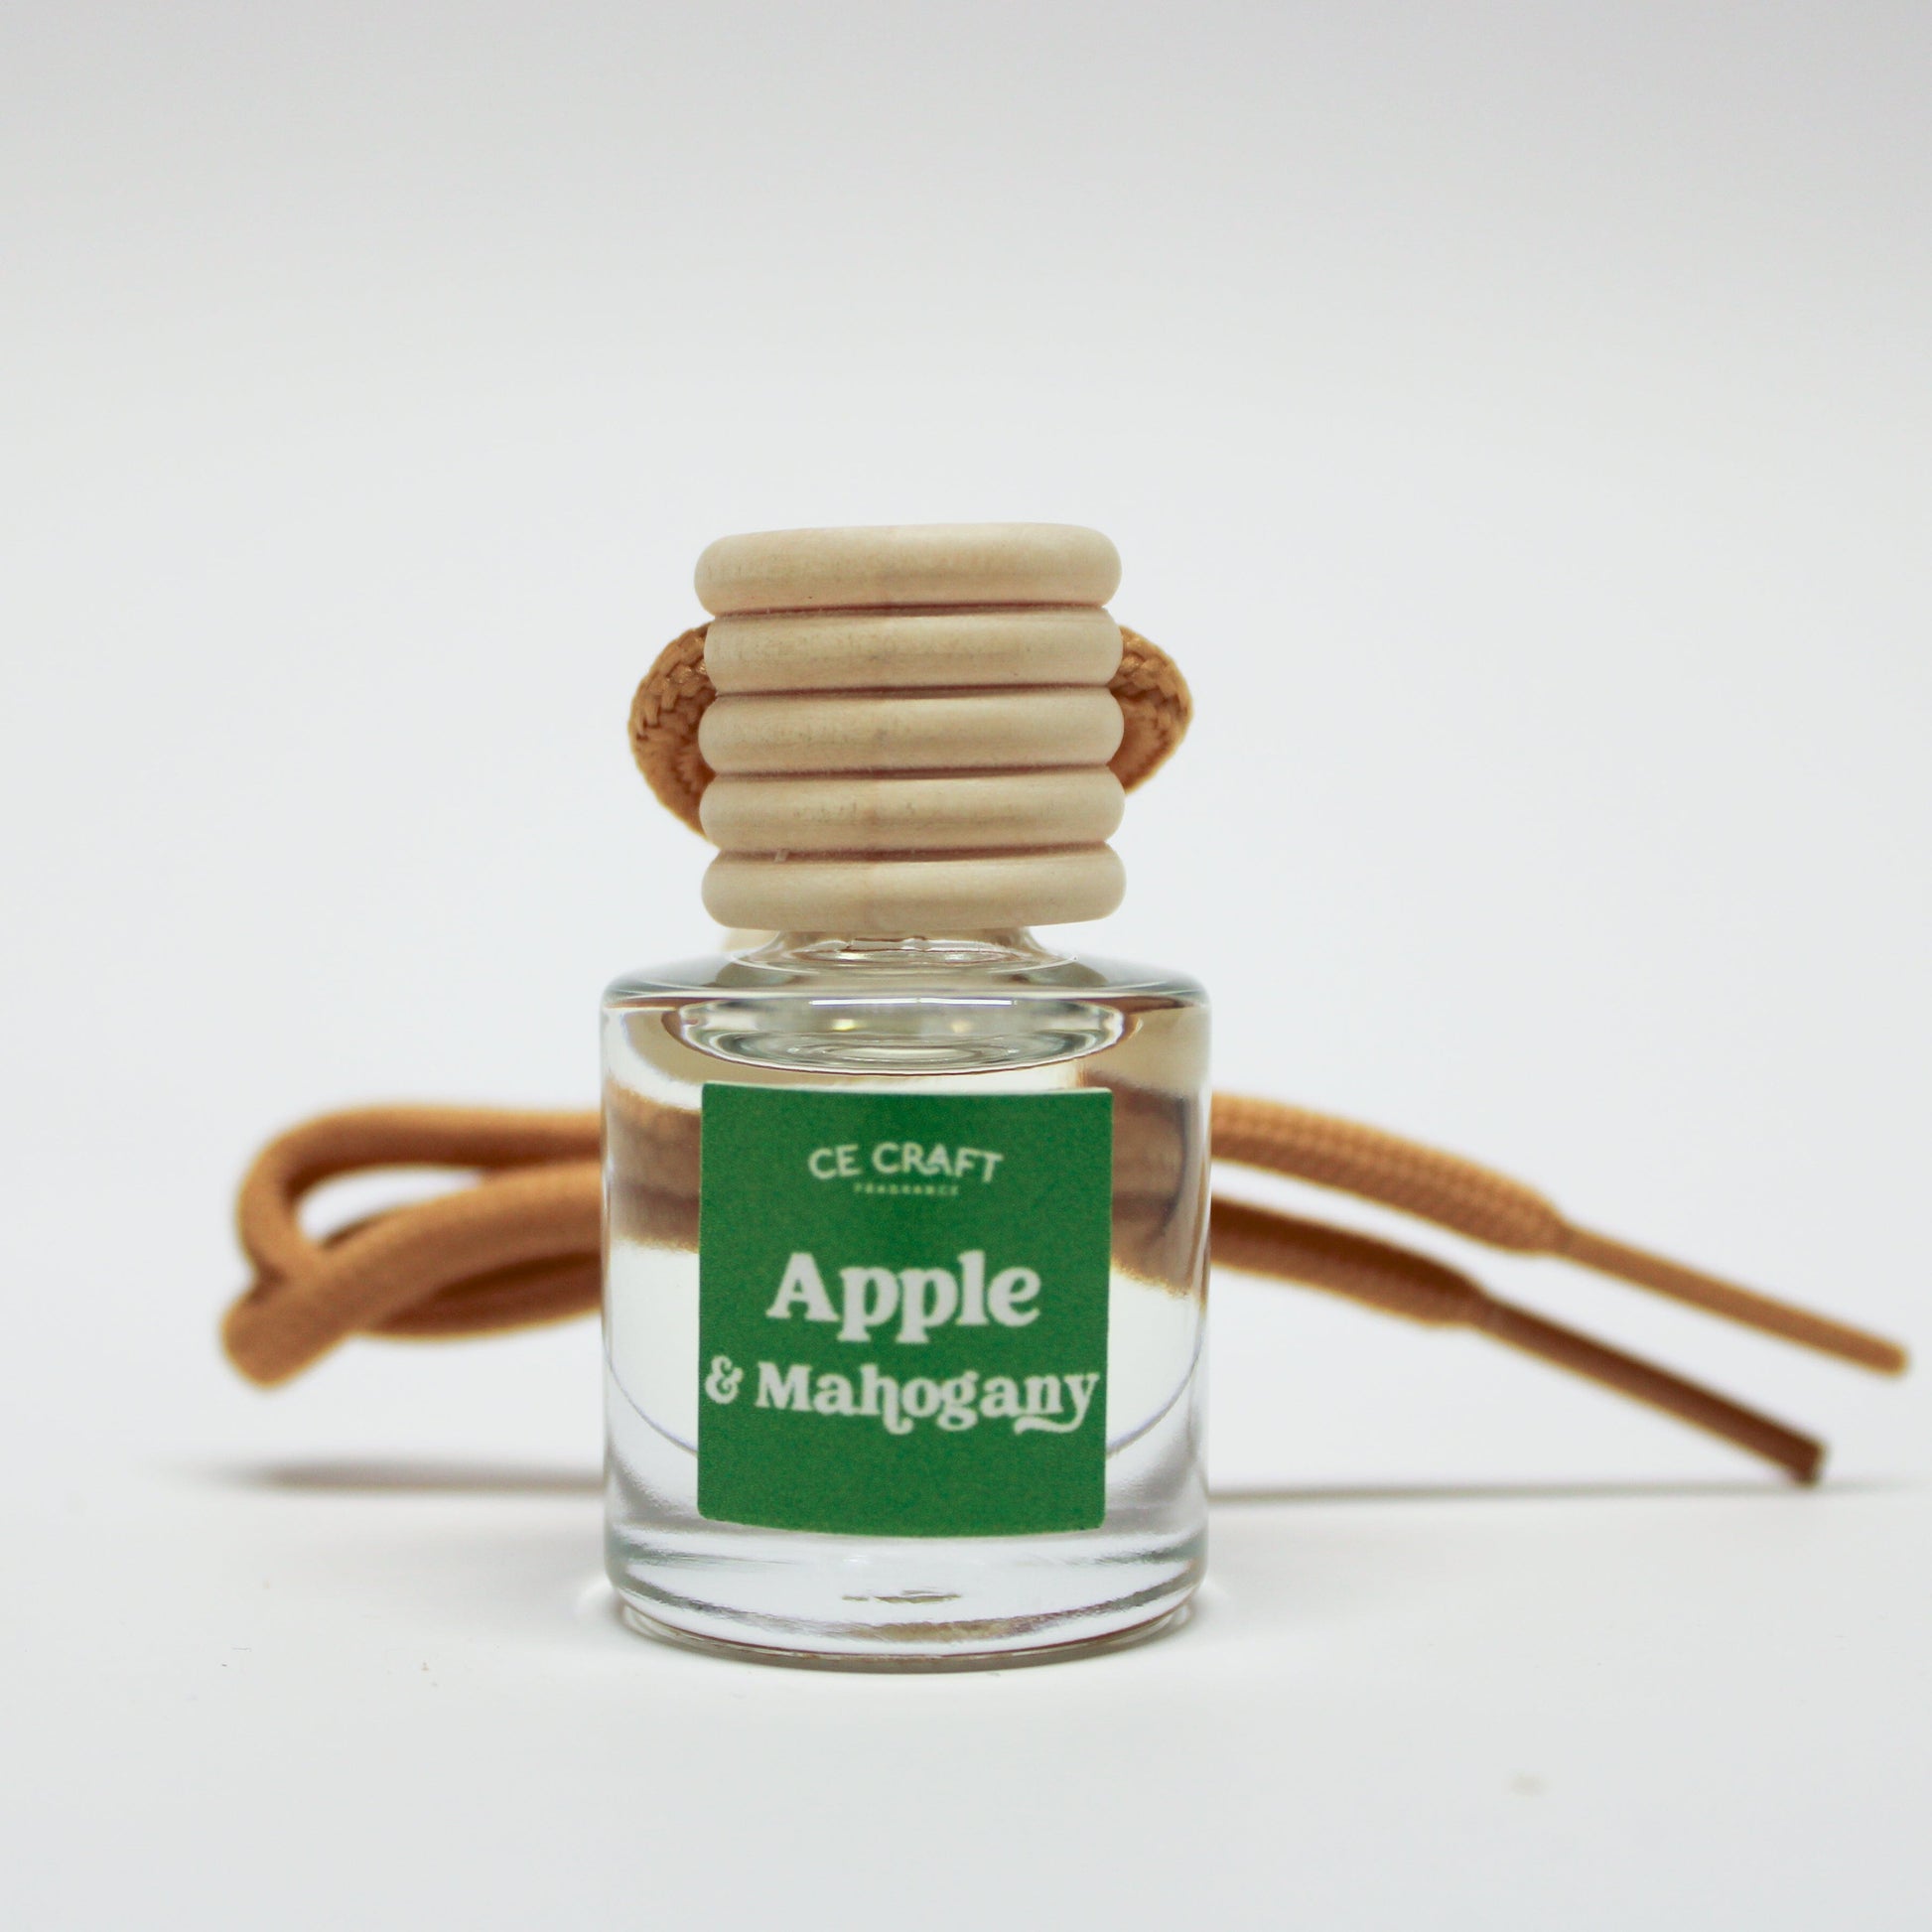 Scented Car Freshener - Car Air Diffuser - Long Lasting Fragrance for Car Vehicle Air Fresheners CE Craft Apple + Mahogany 